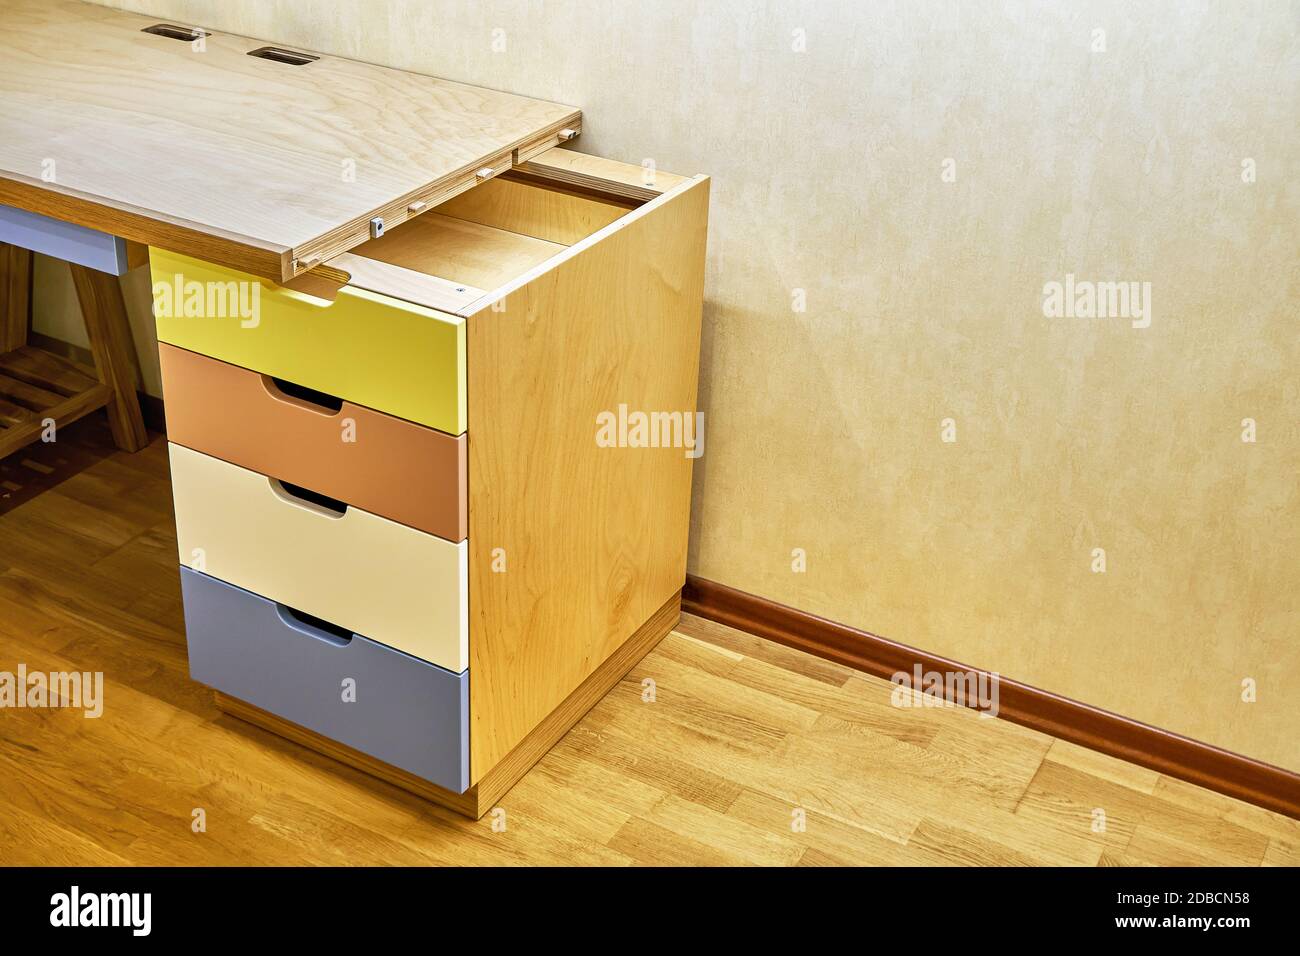 Plywood desk with multi color drawers during assembly. Fragment of the writing desk Stock Photo